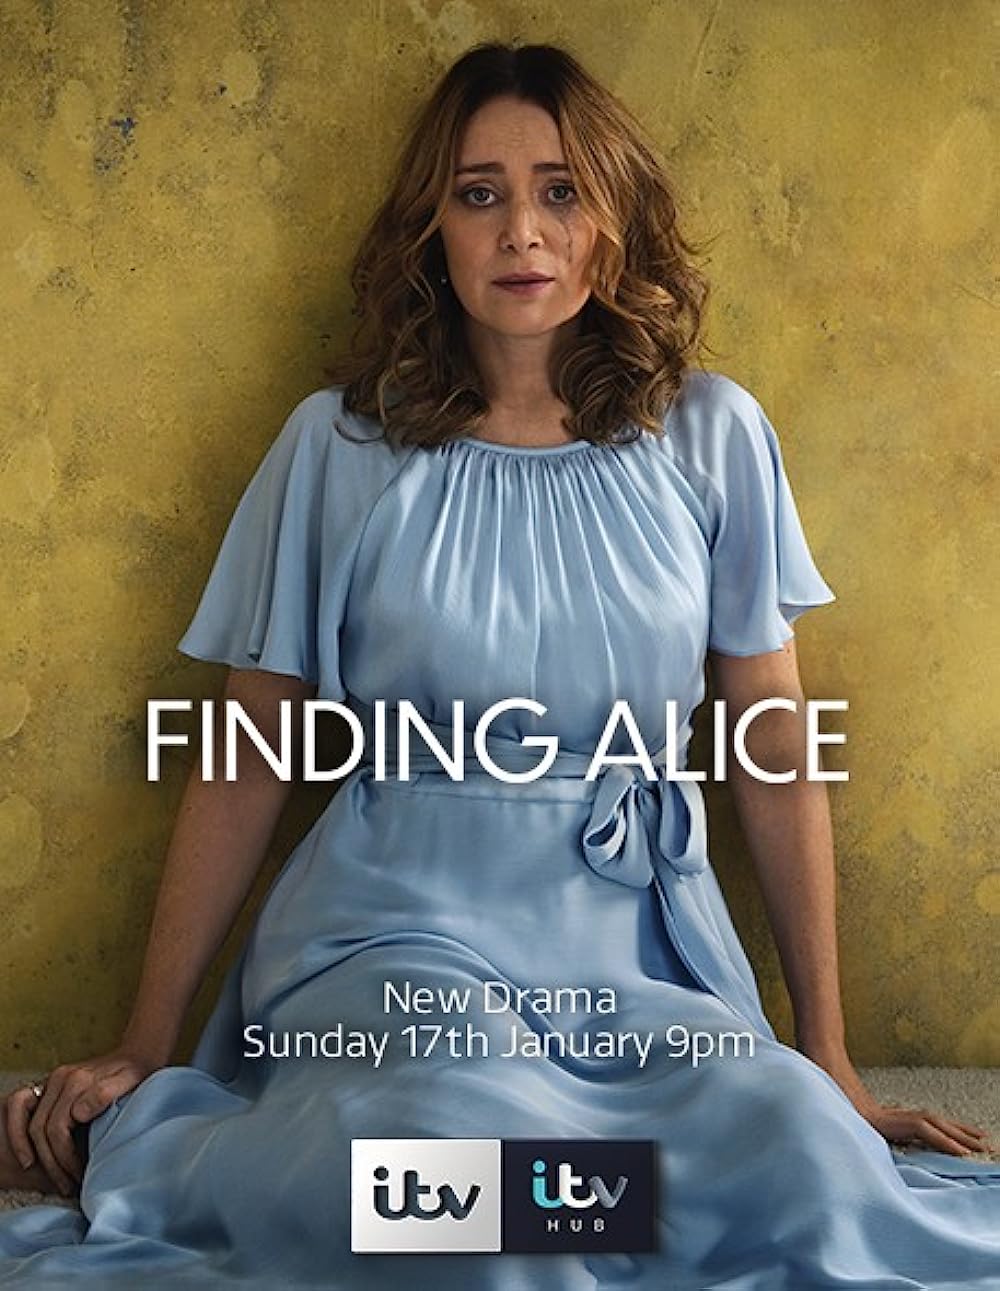 Finding Alice poster